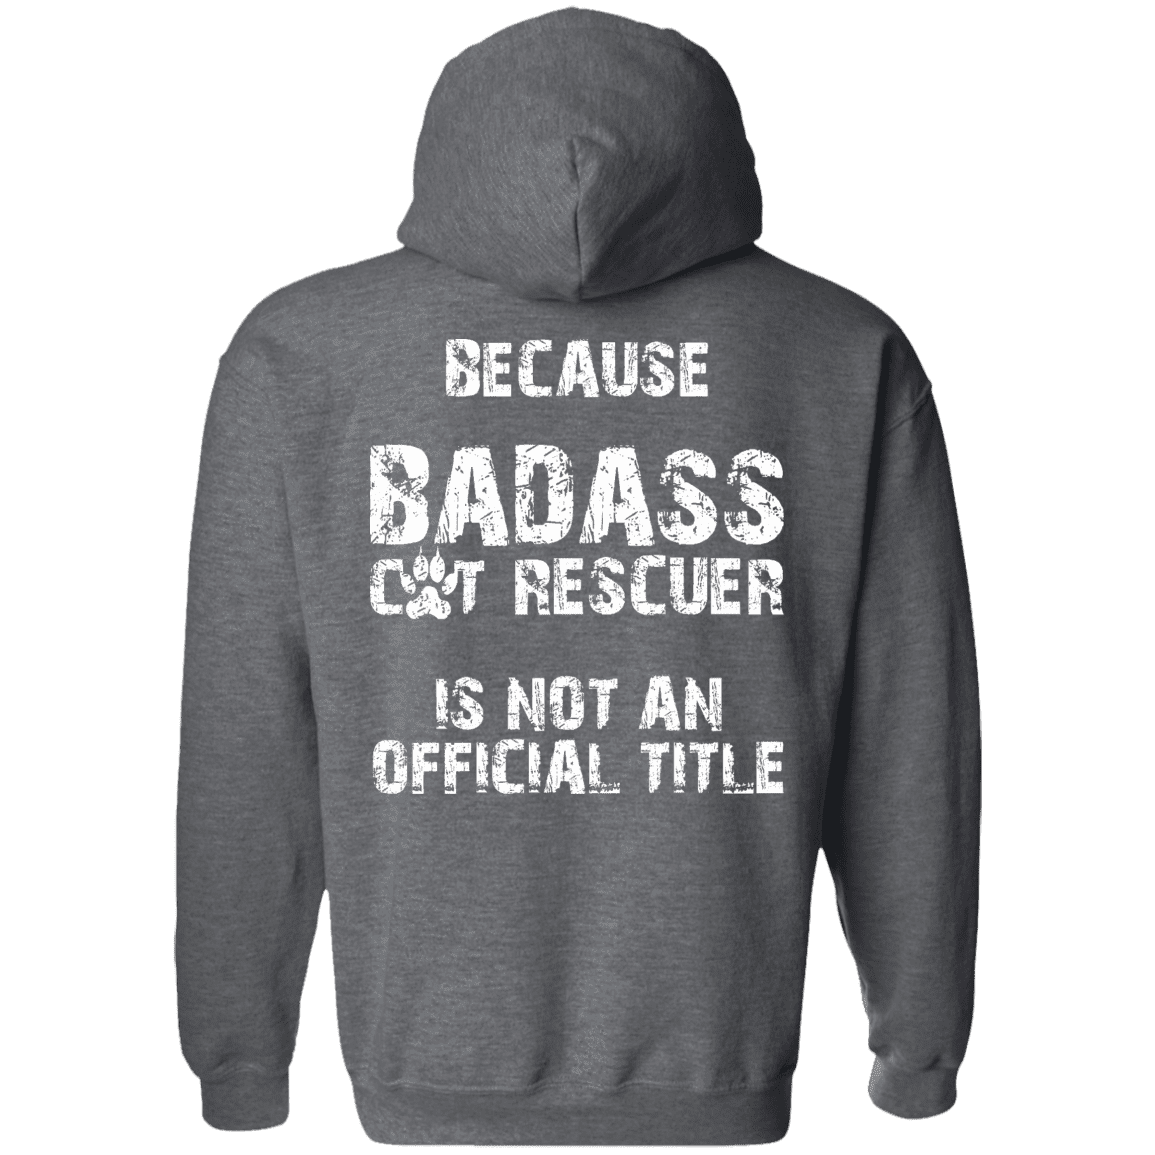 Bad*ss Cat Rescuer - Hoodie.